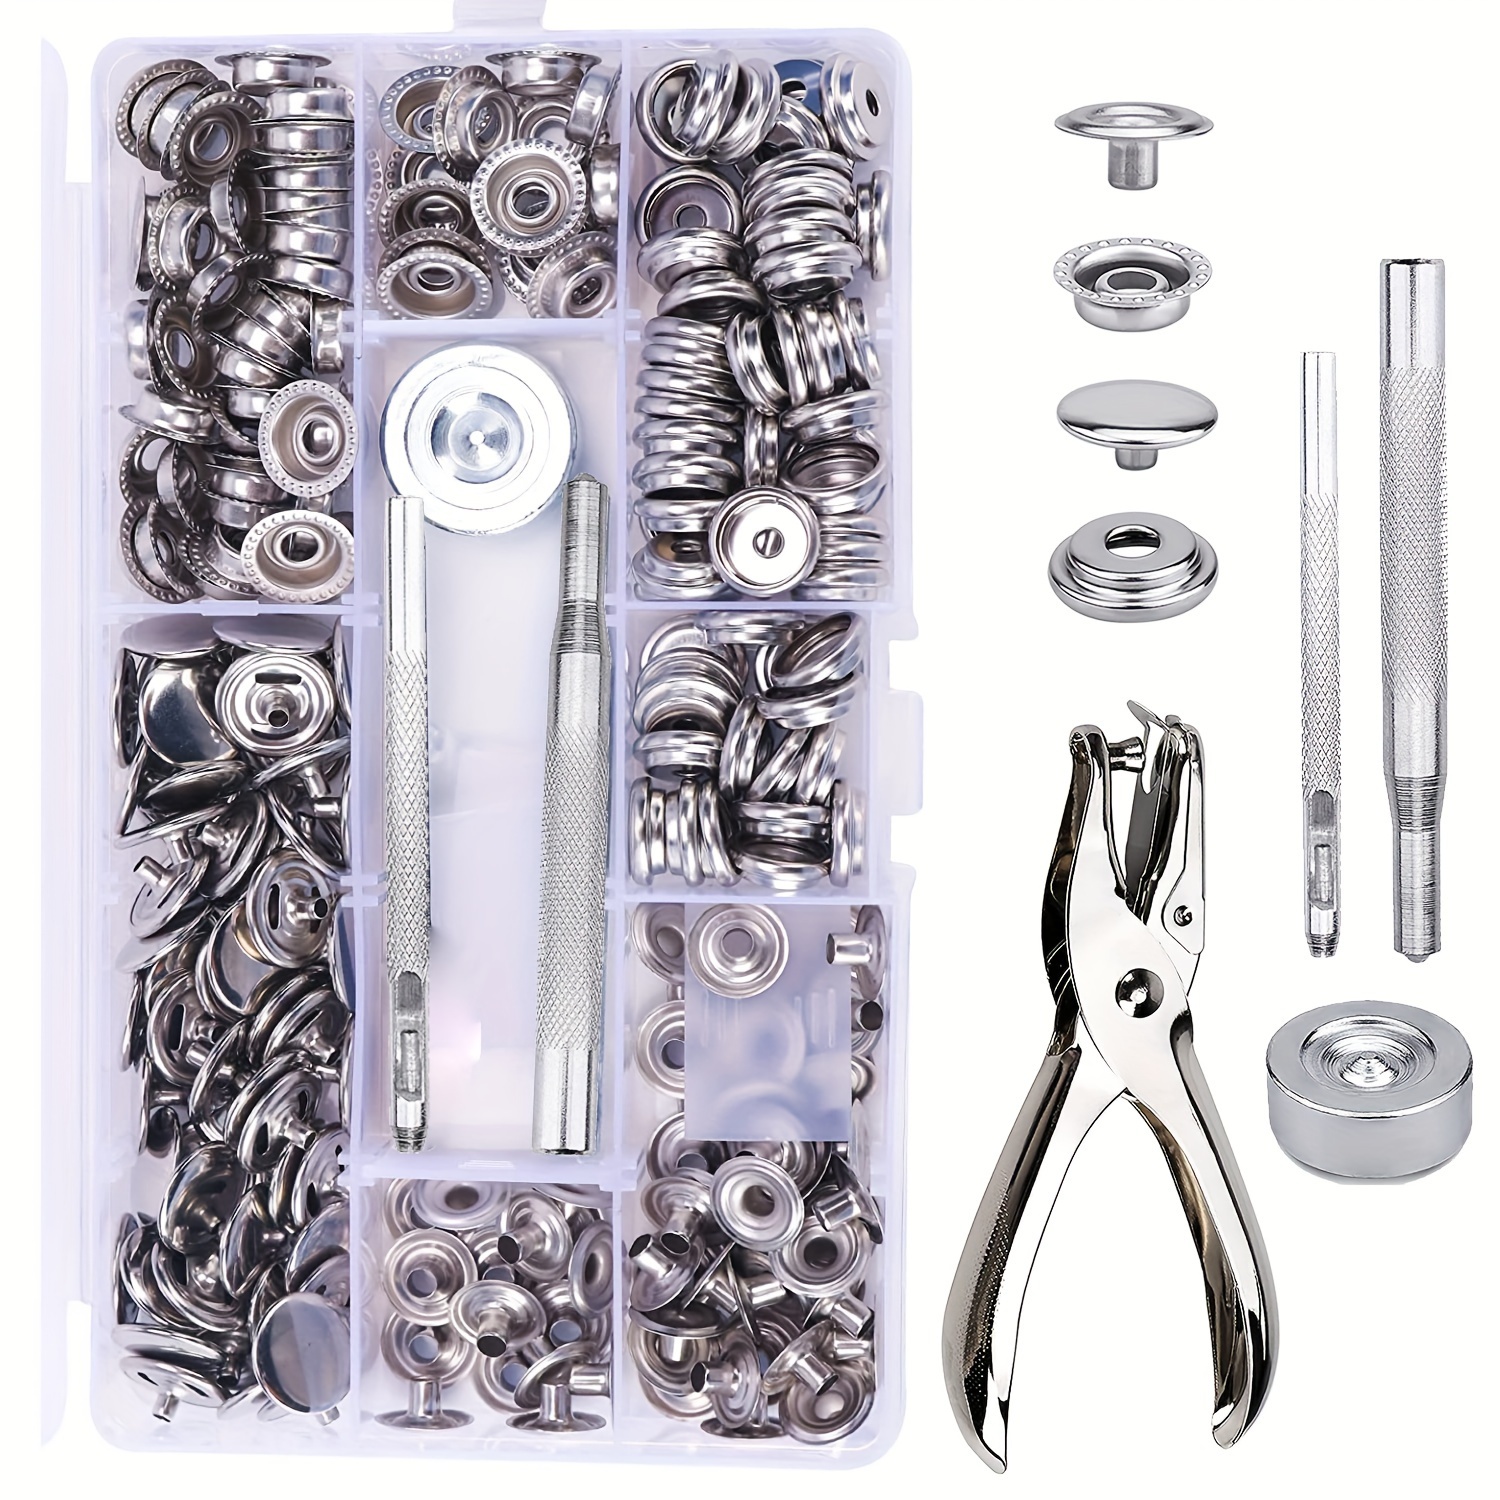 

50-pack Stainless Steel Snap Buttons Kit With Installation Tools, 15mm - Ideal For Diy Crafts On Canvas, Jeans, Jackets & More Soiiw Fabric Button Maker Kit Handmade